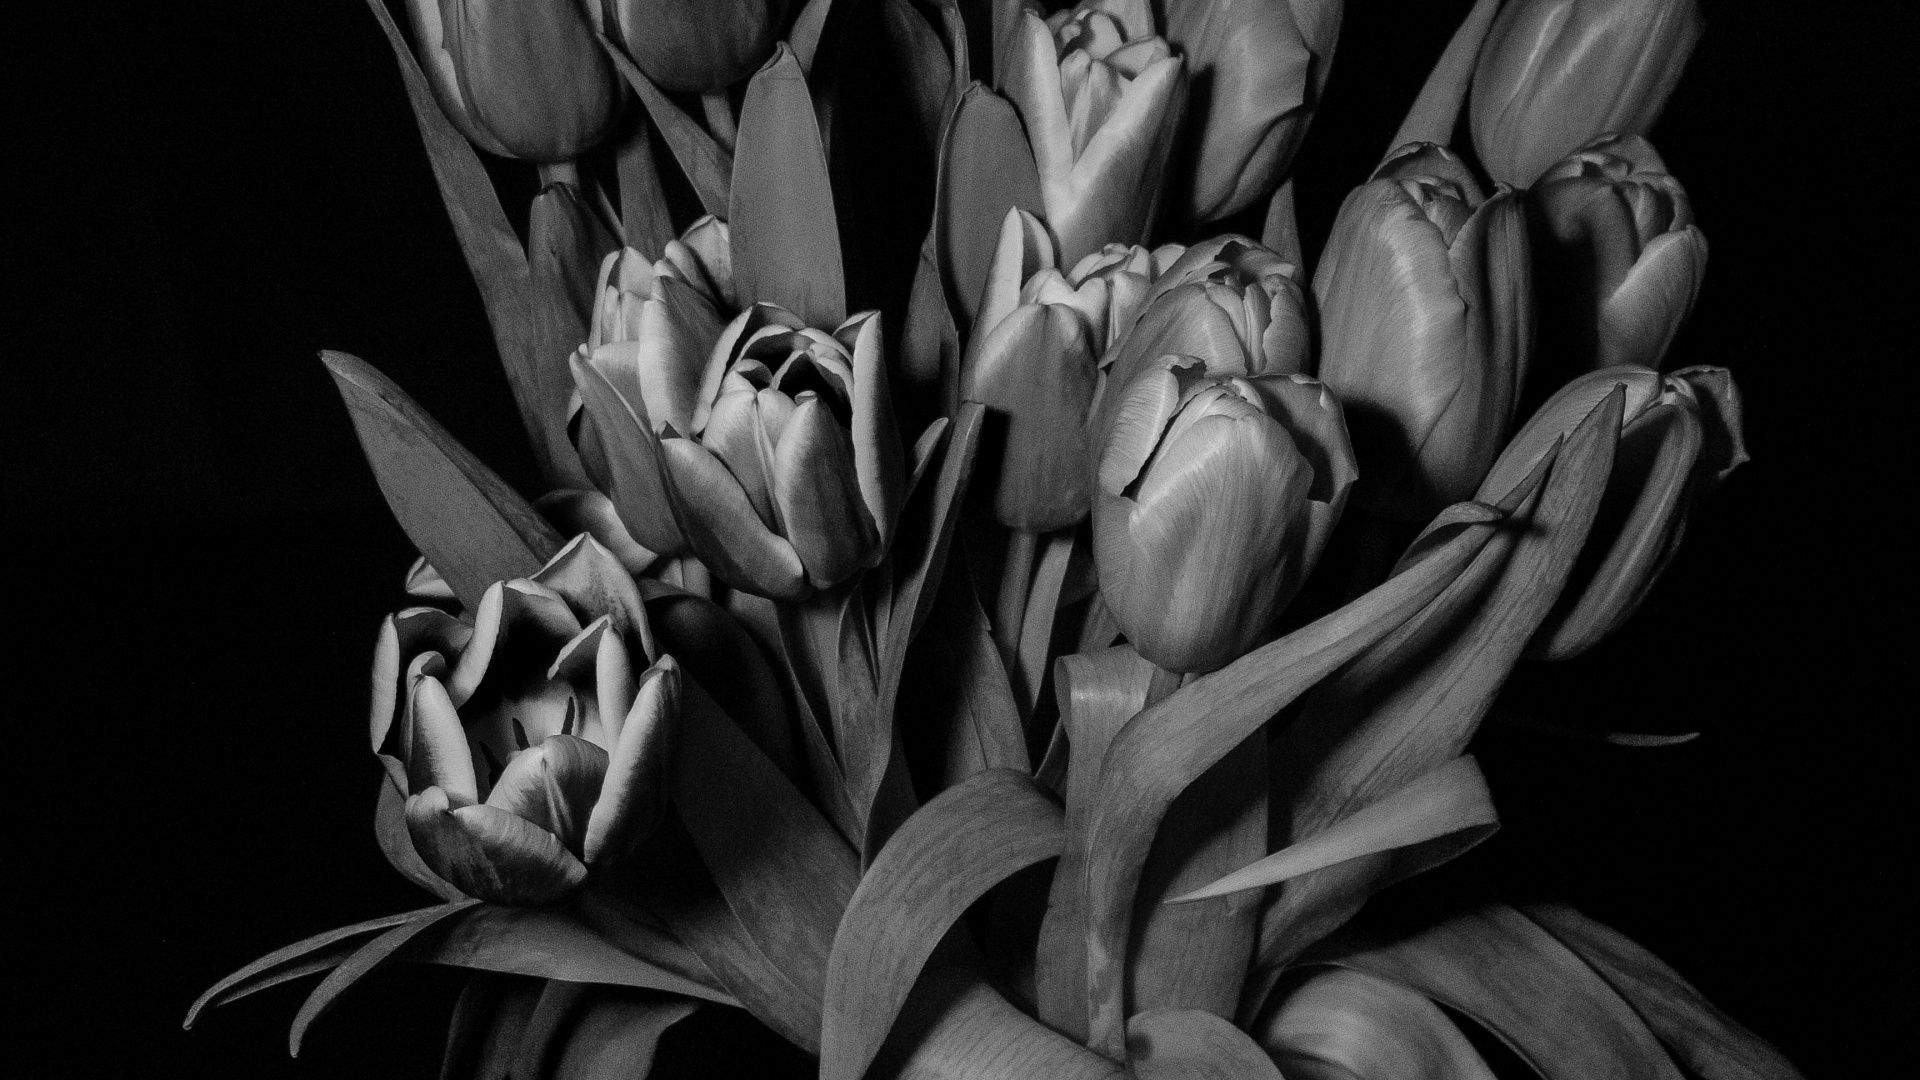 Grayscale Photo of Tulips in Bloom. Wallpaper in 1920x1080 Resolution